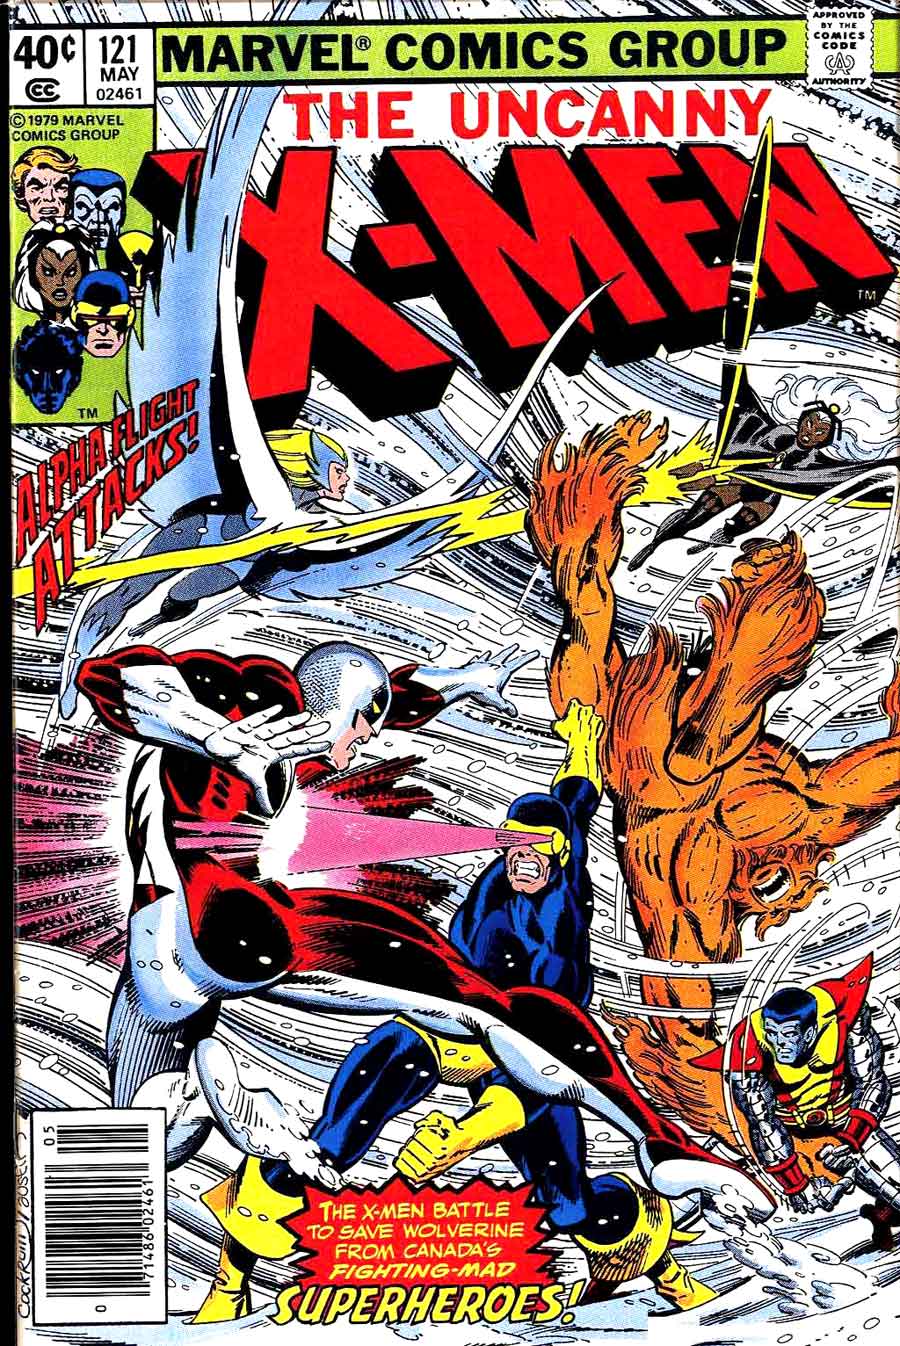 X-men #121 George Perez marvel key issue 1970s bronze age comic book cover - 1st appearance Alpha Flight